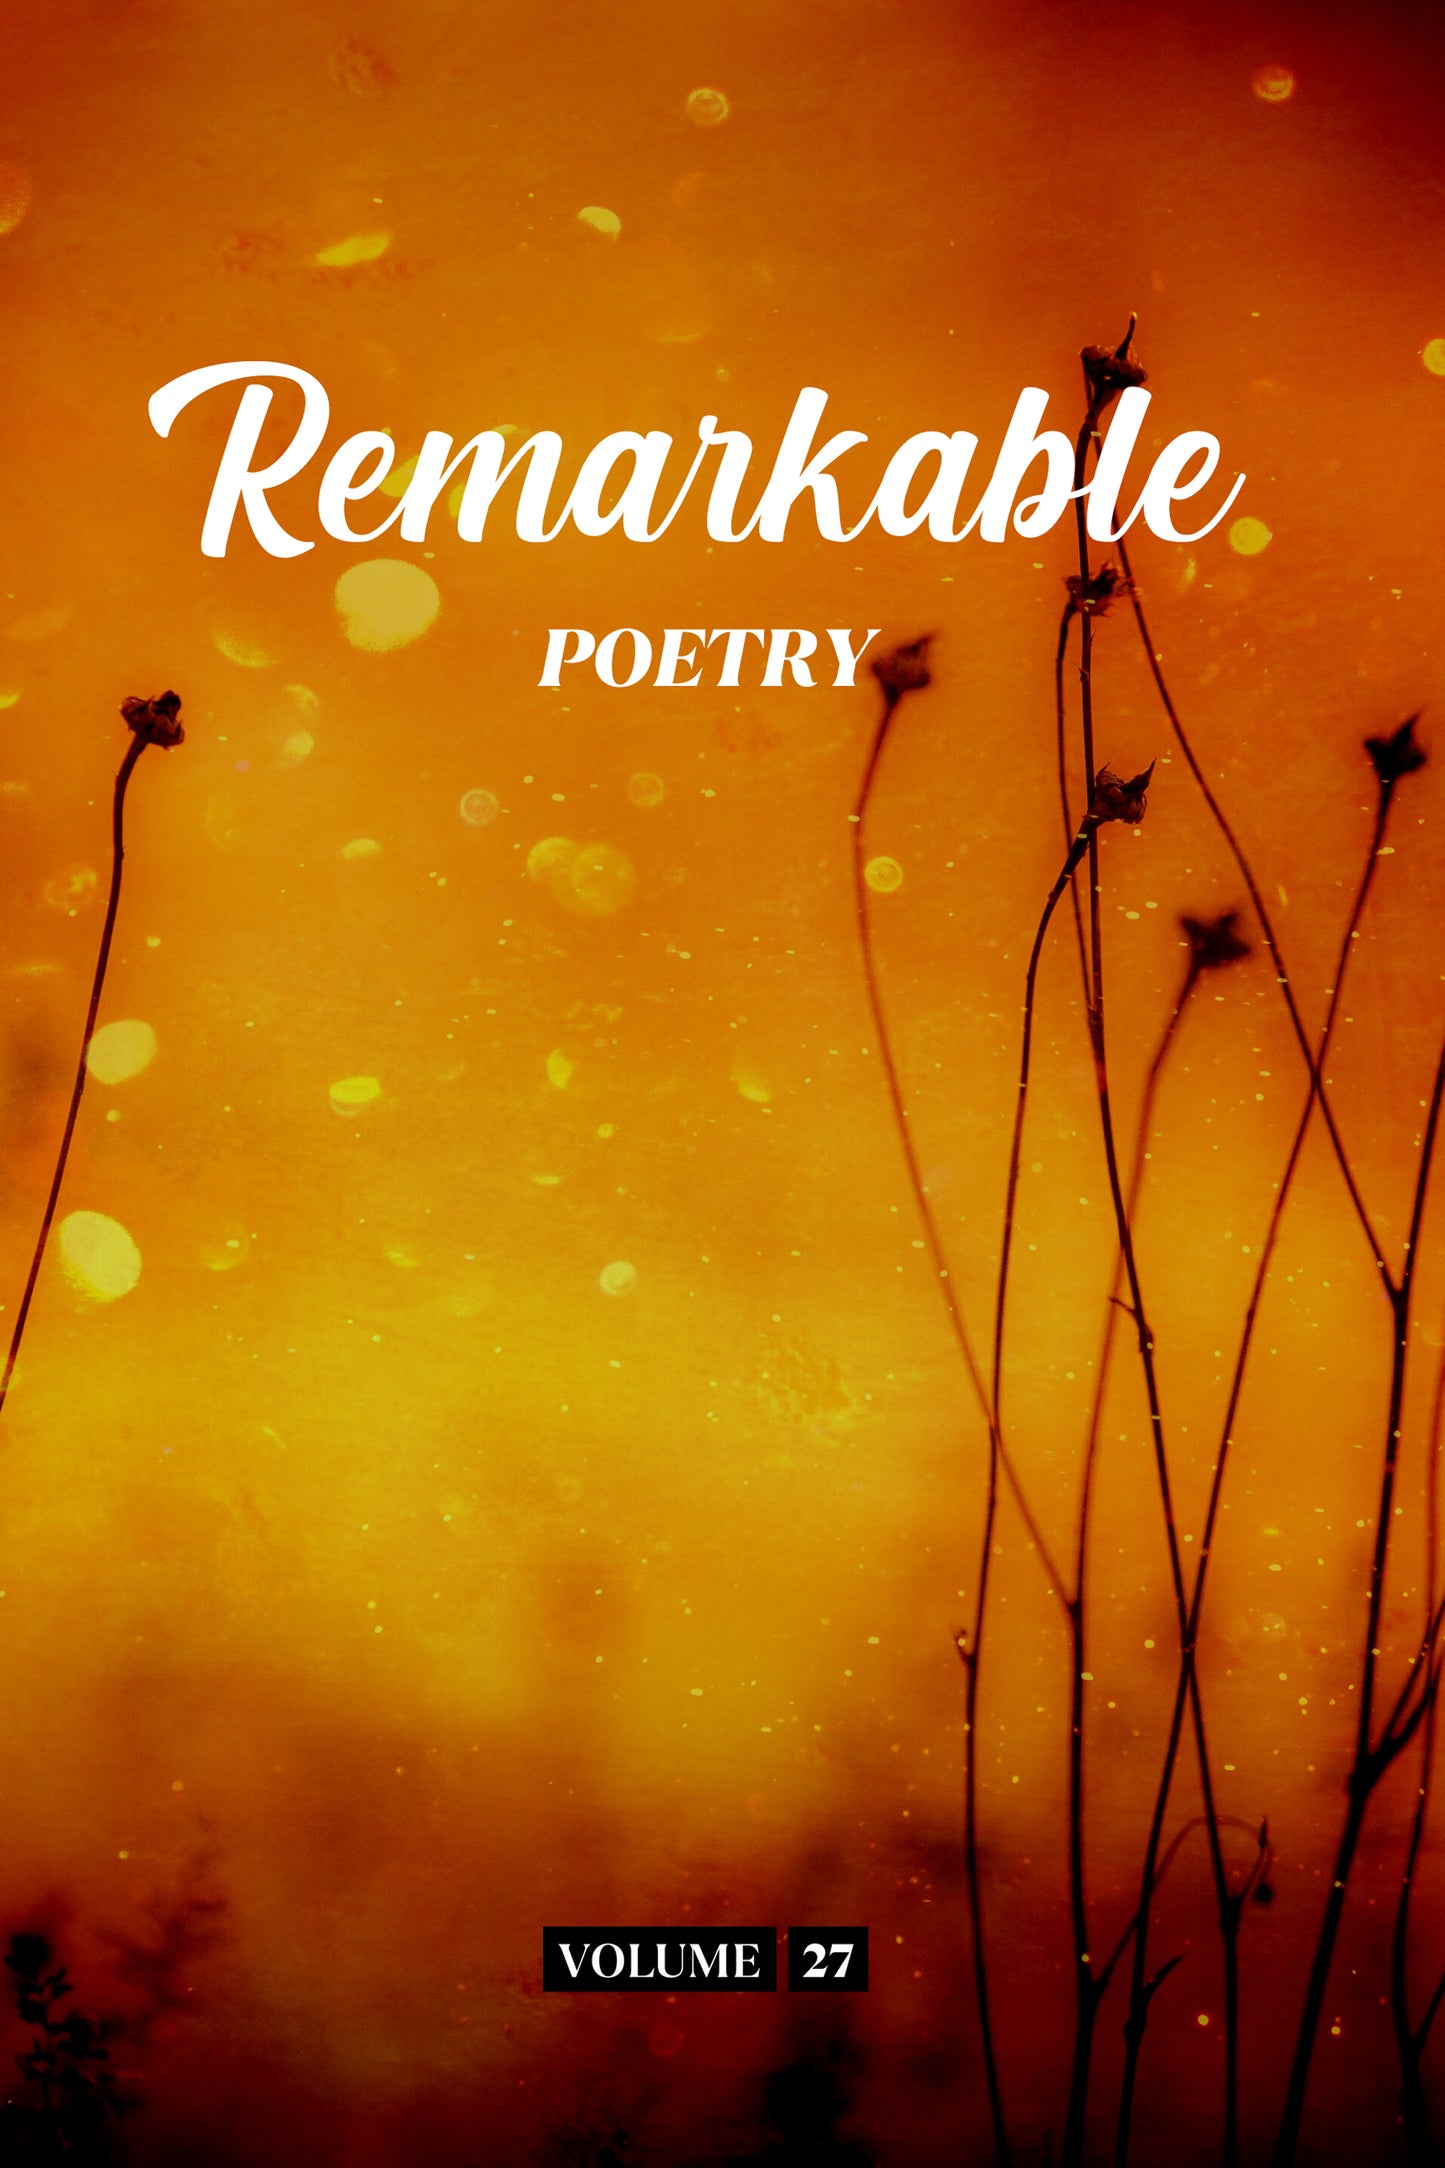 Remarkable Poetry (Volume 27) - Physical Book (Pre-Order)